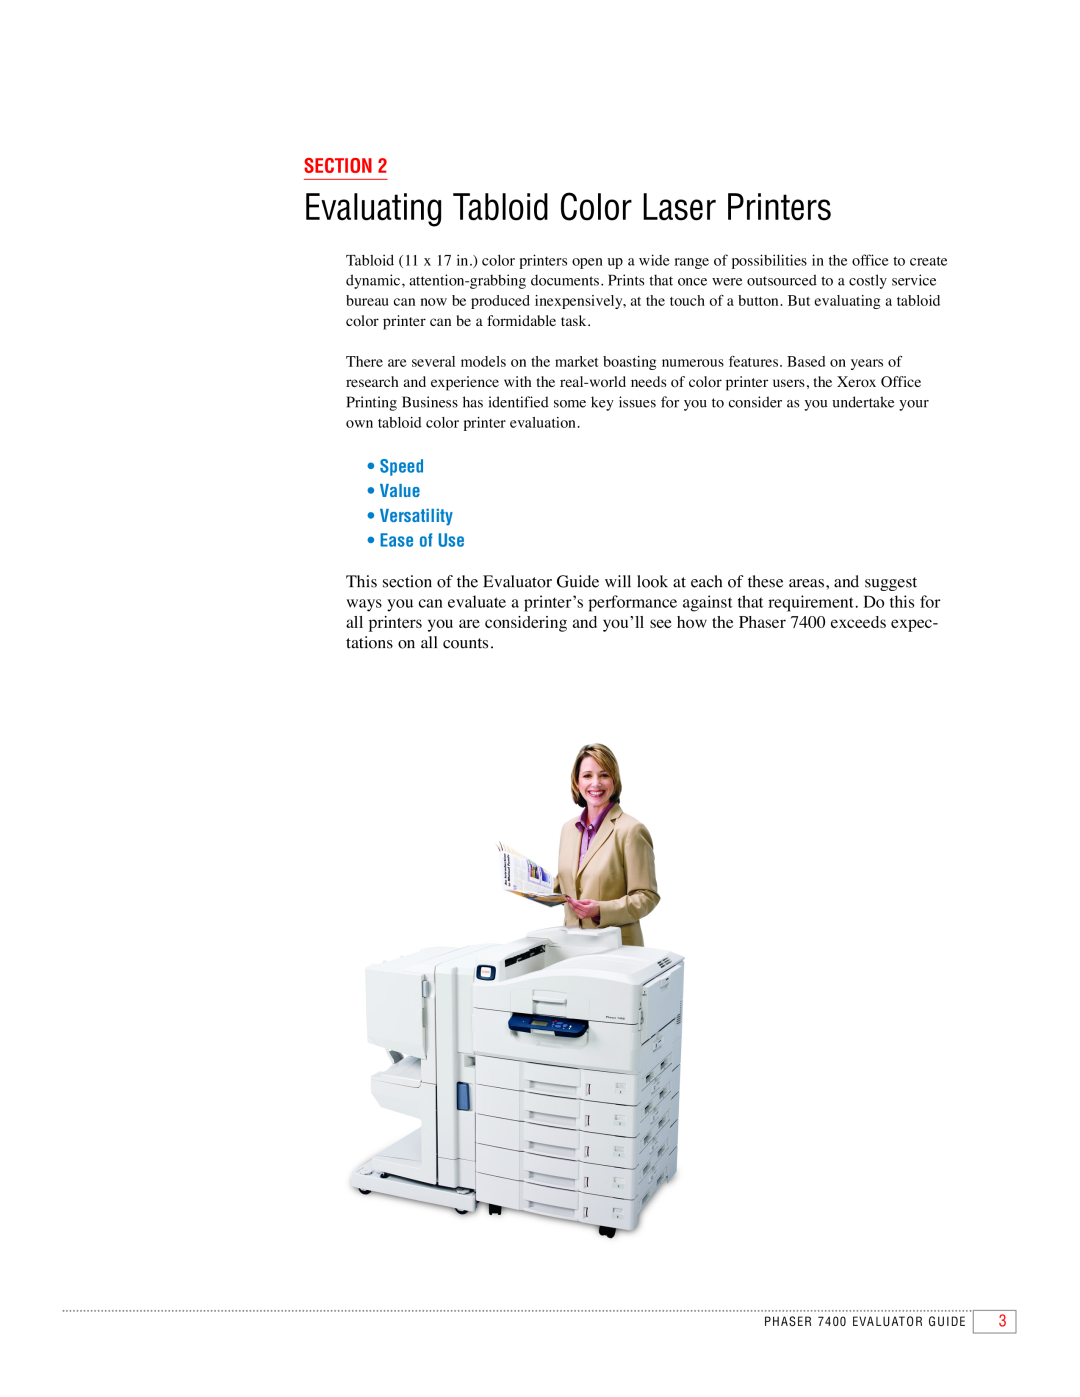 Xerox 7400 manual Evaluating Tabloid Color Laser Printers, Section, Speed Value Versatility Ease of Use 